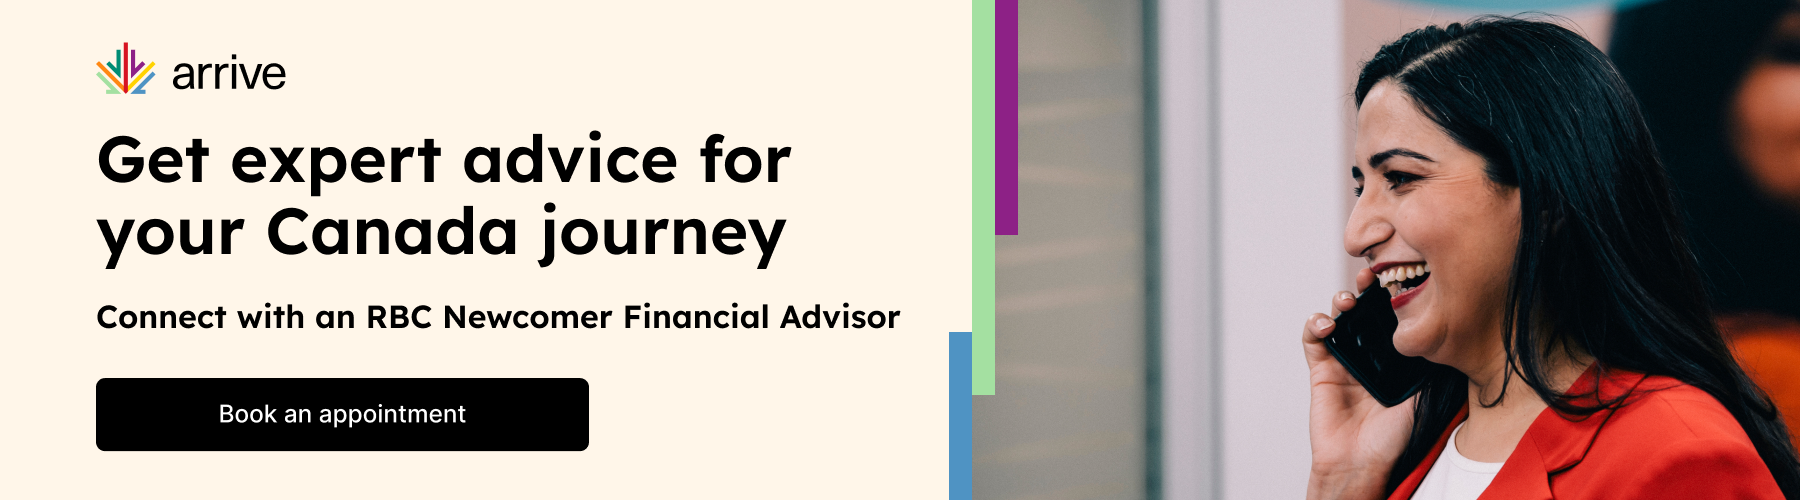 Connect with an RBC Newcomer Financial Advisor